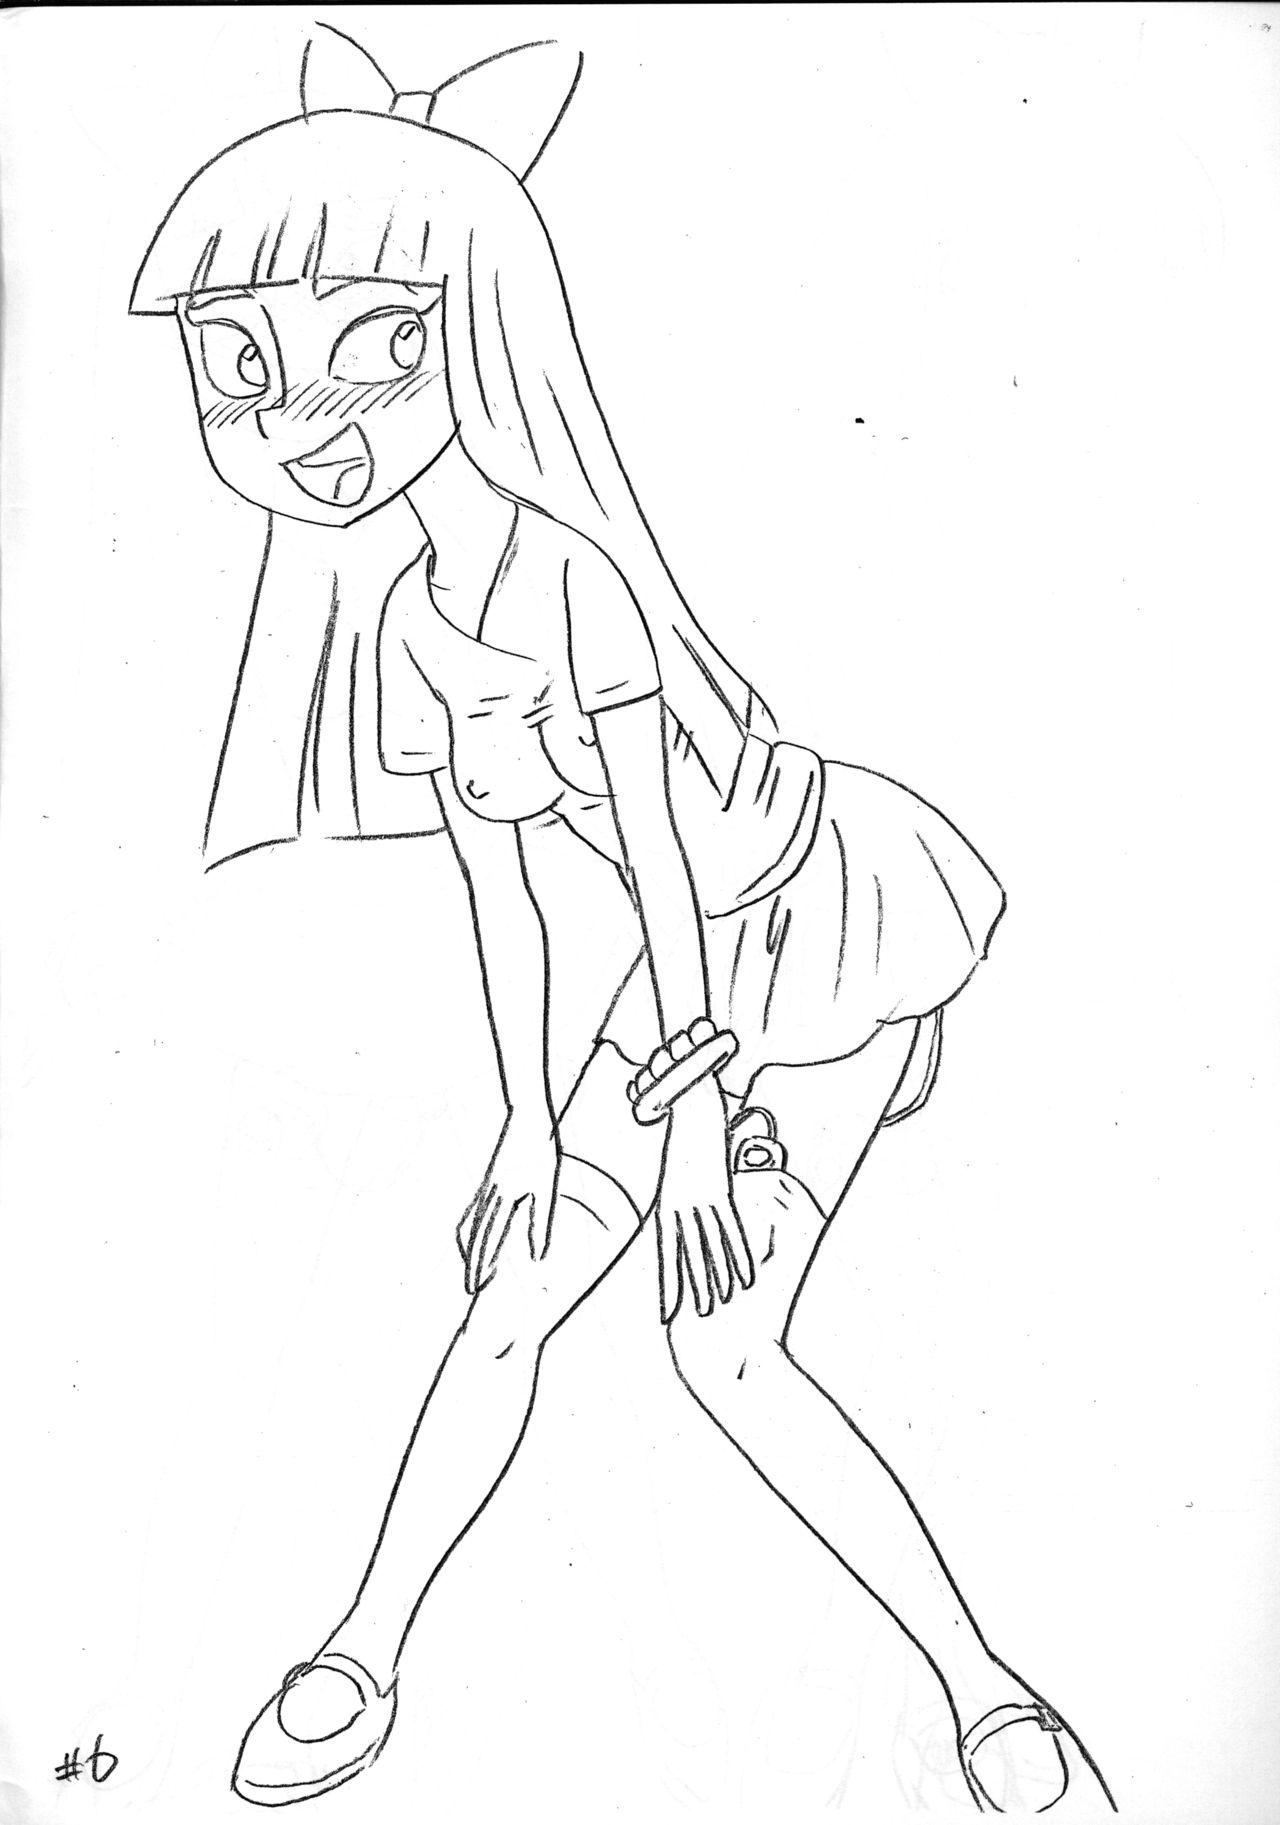 Oral Sex Psychosomatic Counterfeit Ex: Stacy in A.S. - Phineas and ferb Cameltoe - Page 5